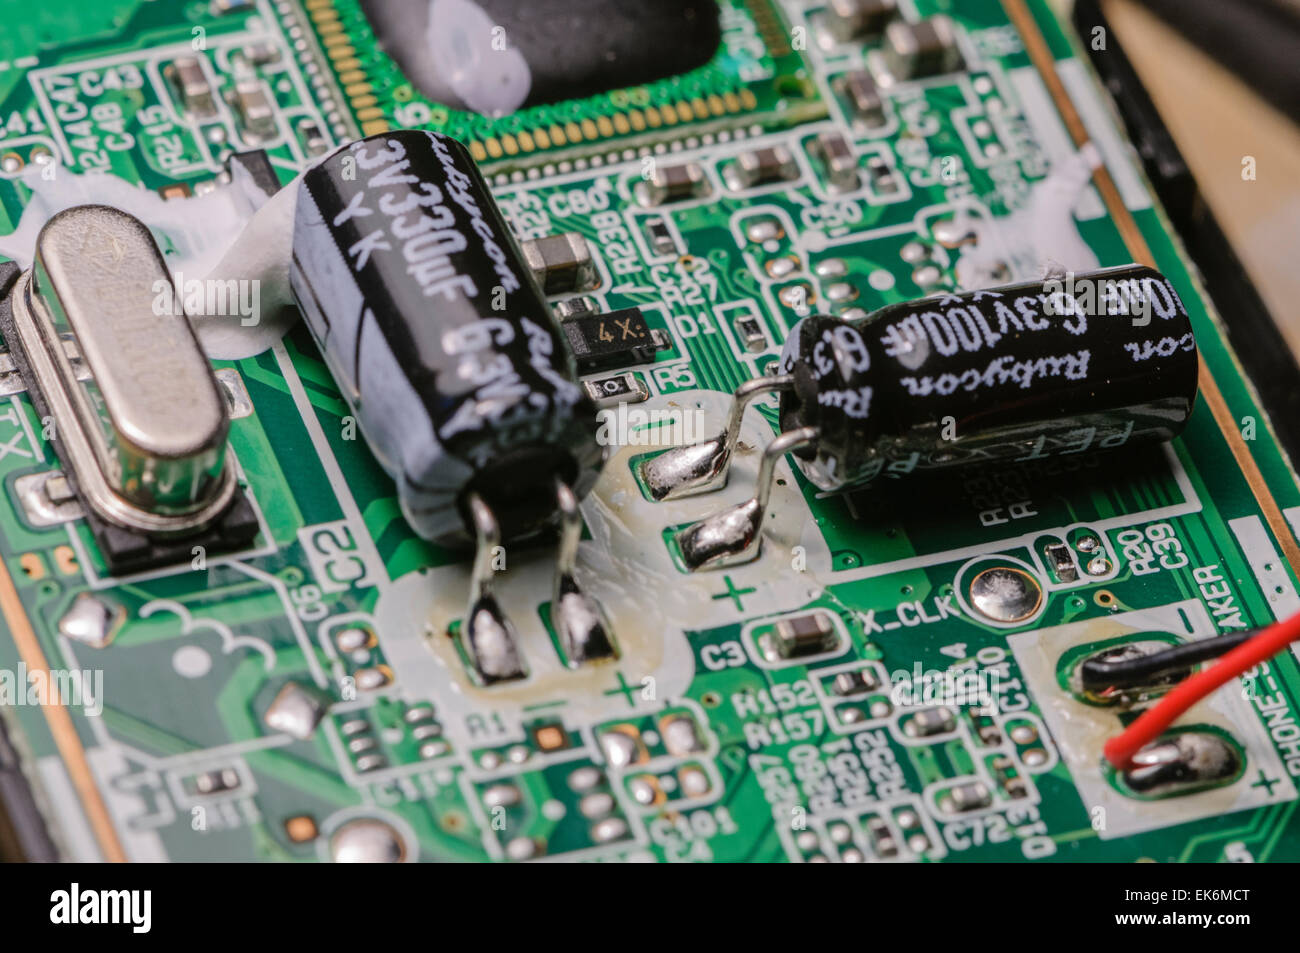 Capacitors, resistors and a crystal on a printed circuit board Stock Photo